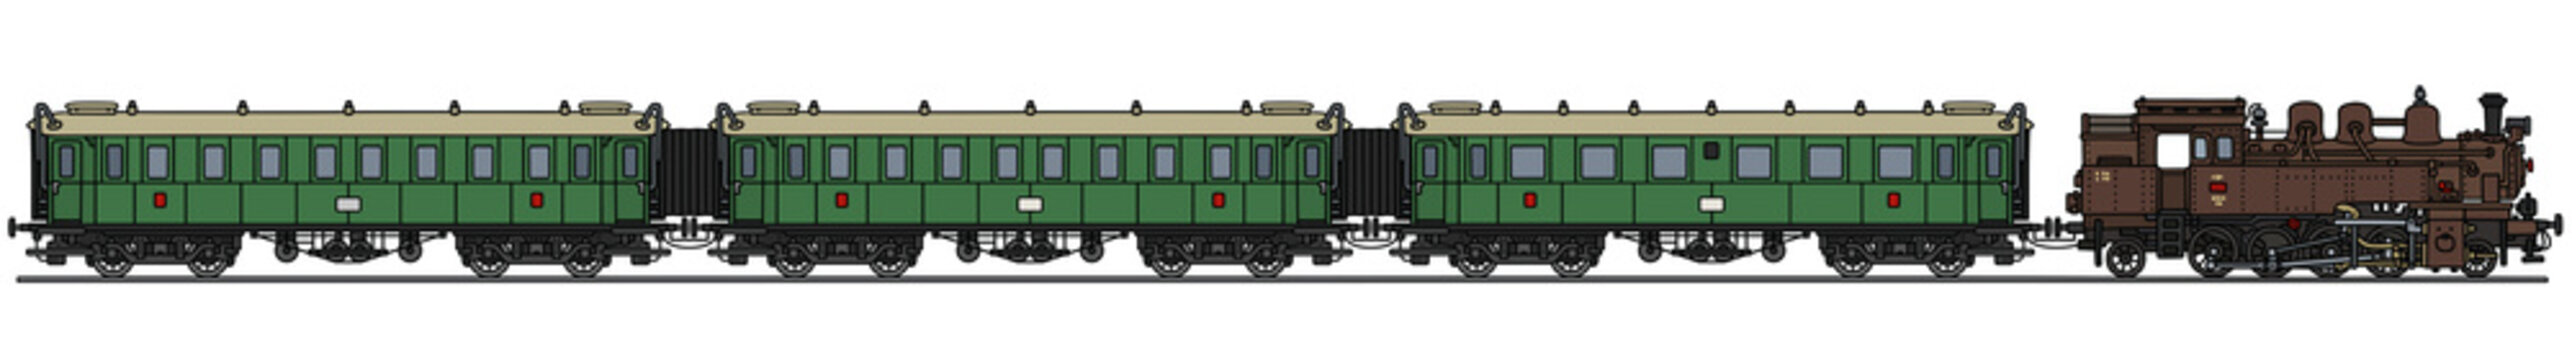 Hand drawing of an old steam passenger train